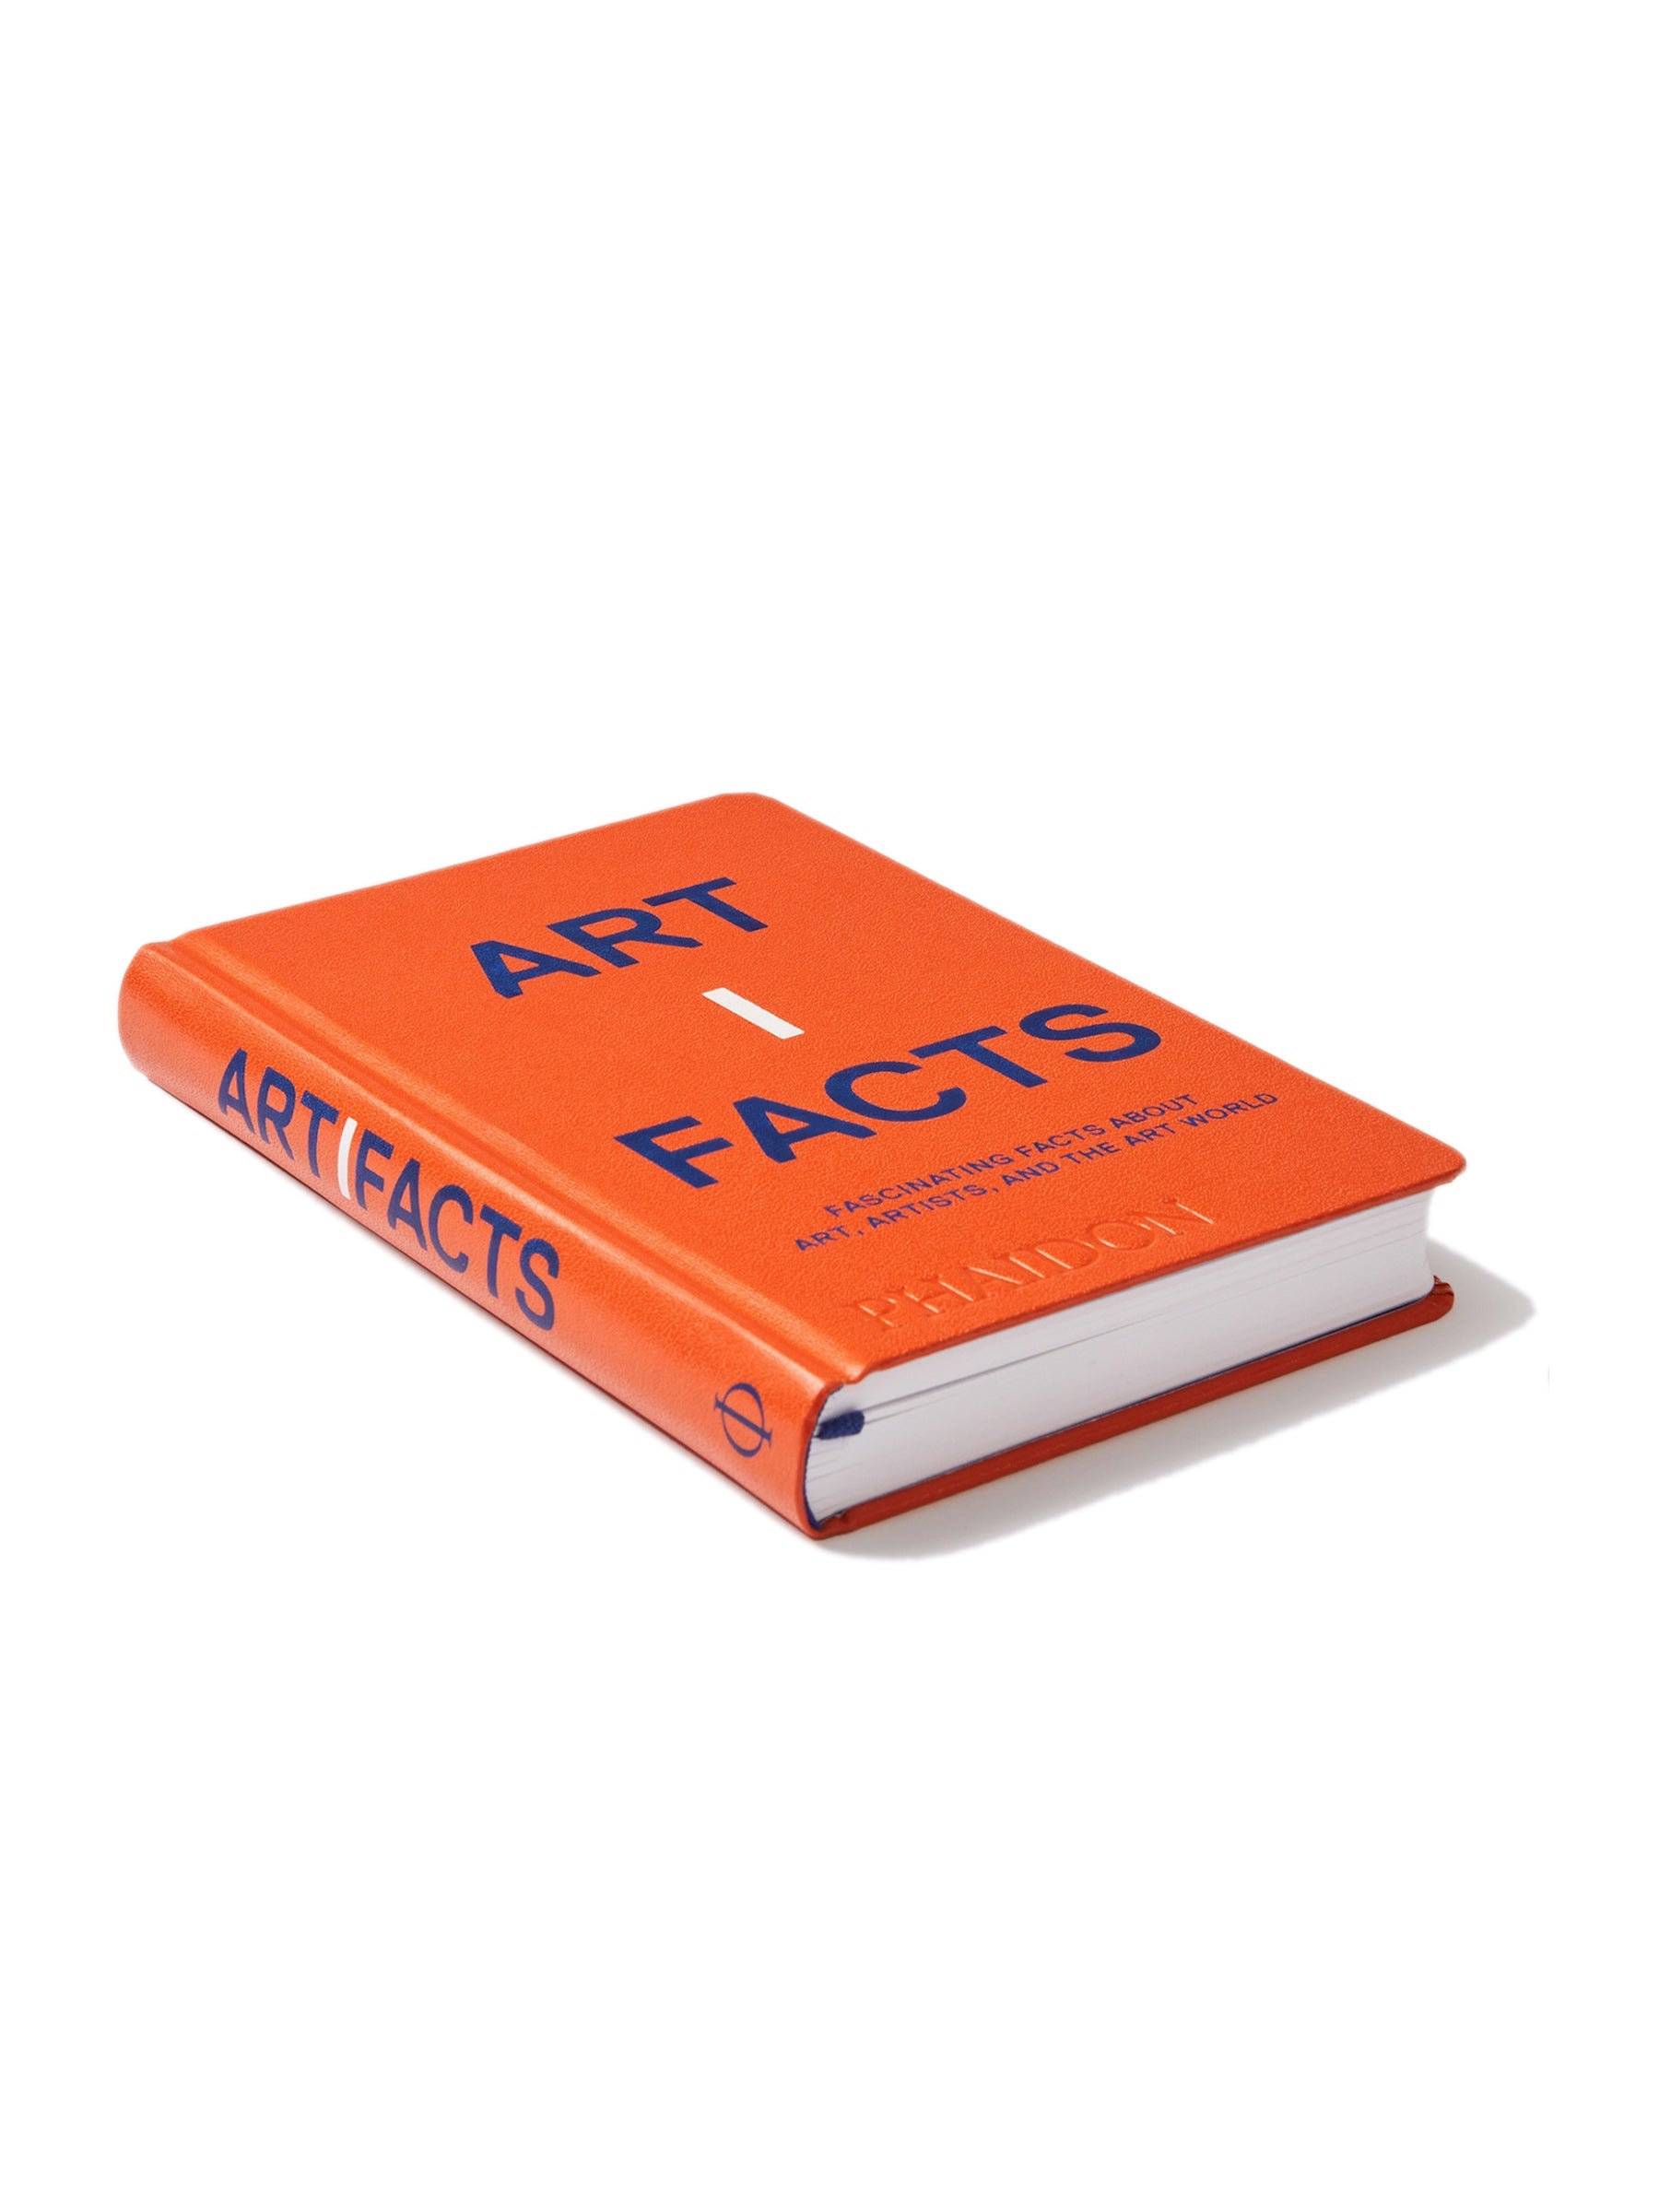 art i facts coffee table book